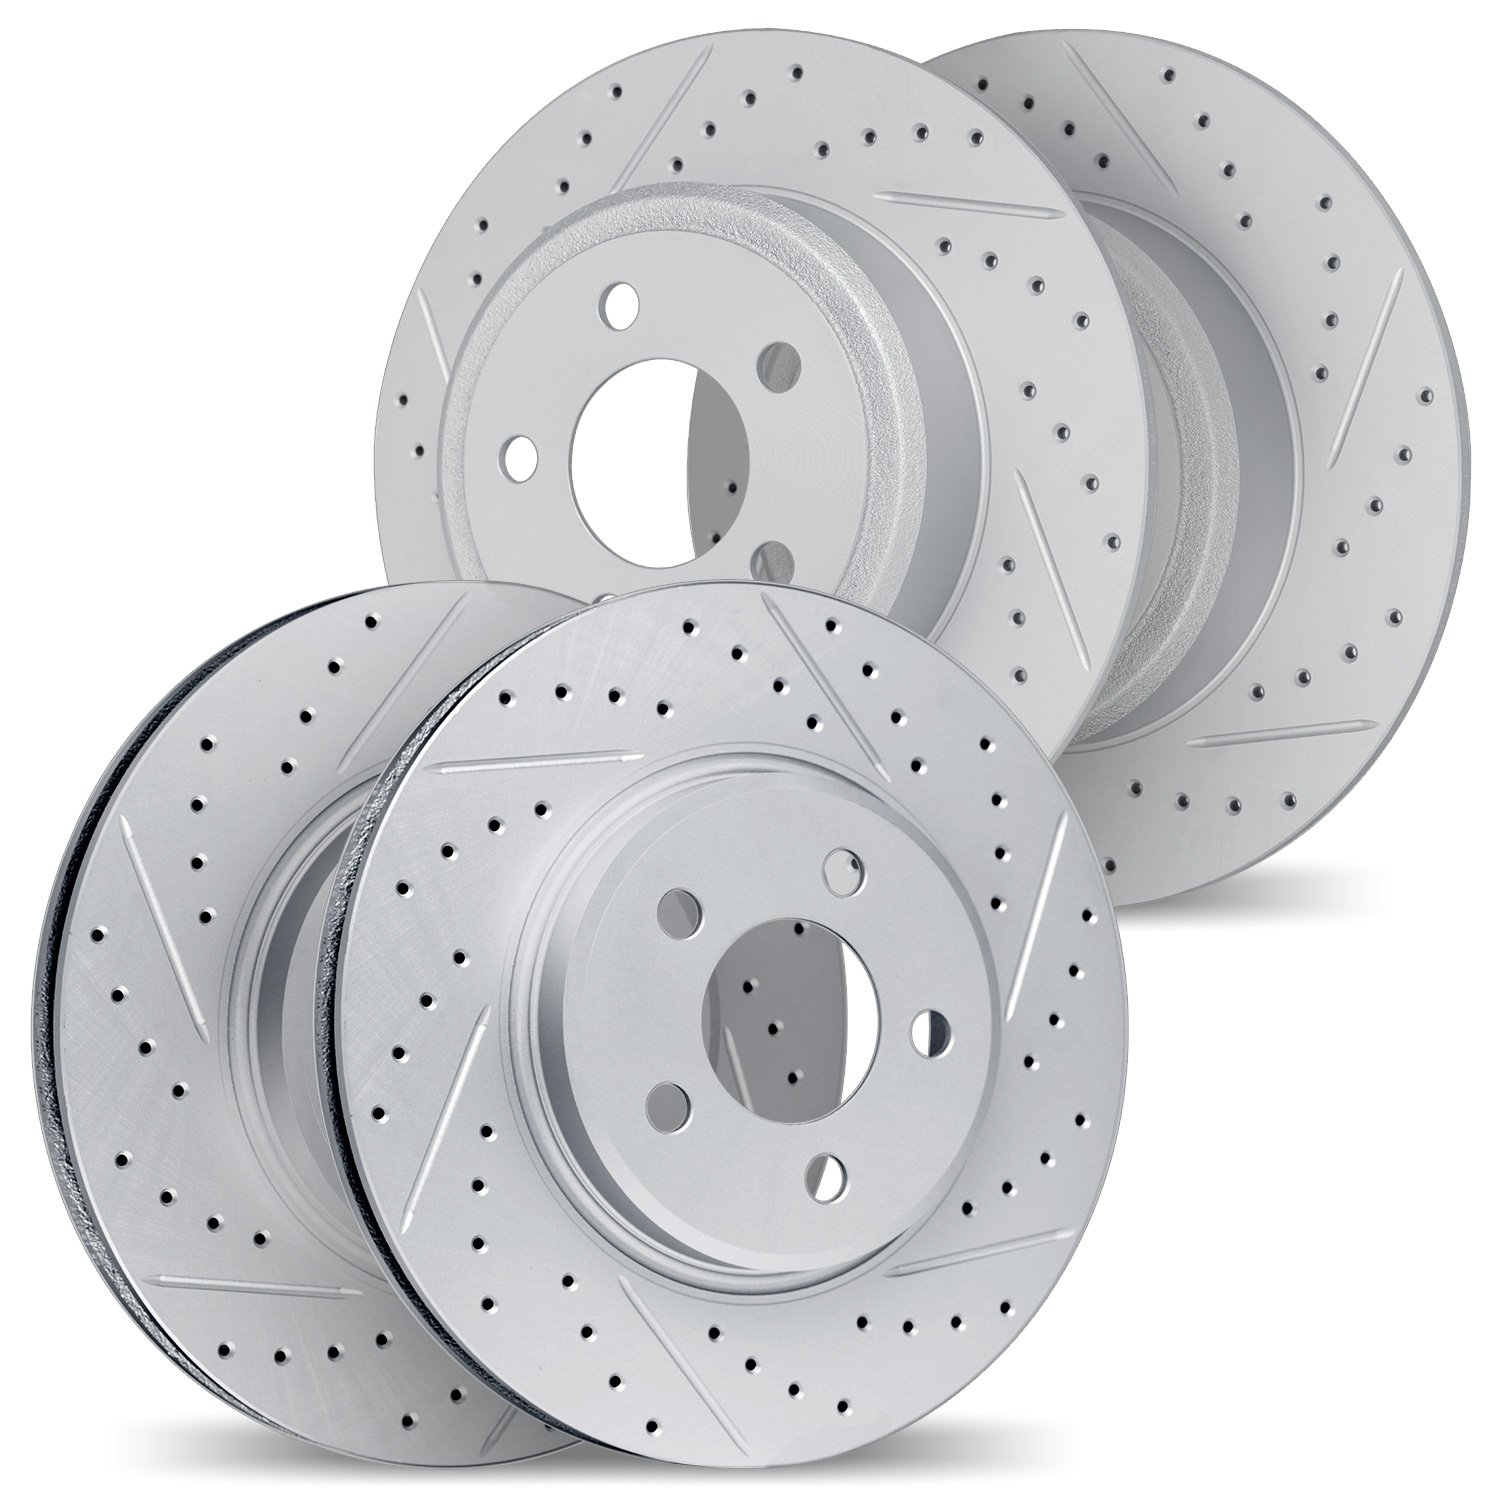 2004-45000 Geoperformance Drilled/Slotted Brake Rotors, 2008-2009 GM, Position: Front and Rear